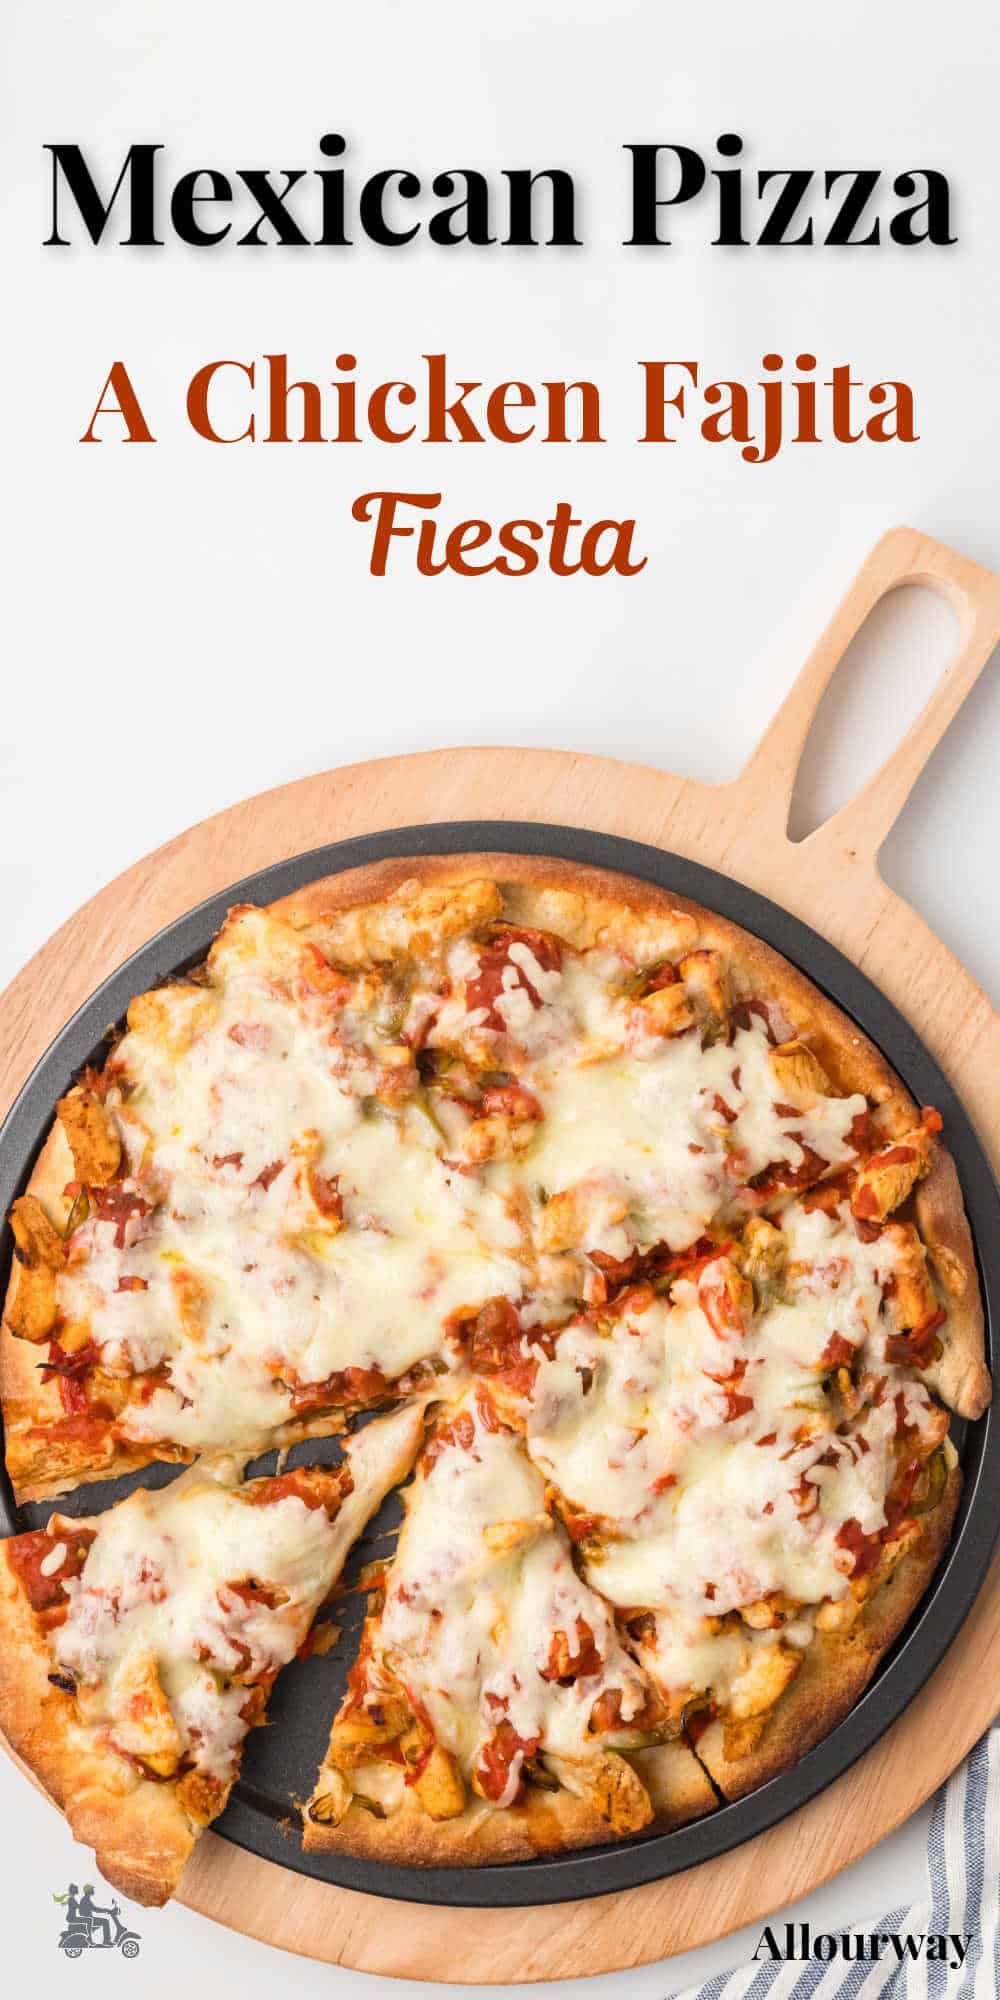 Give your taste buds a fiesta they won't forget with this scrumptious, easy Chicken Mexican Fajita Pizza! Whether it's a family get-together or a friends' gathering, everyone will be asking for seconds of this spicy, flavor-packed, and on-so-cheesy delight.